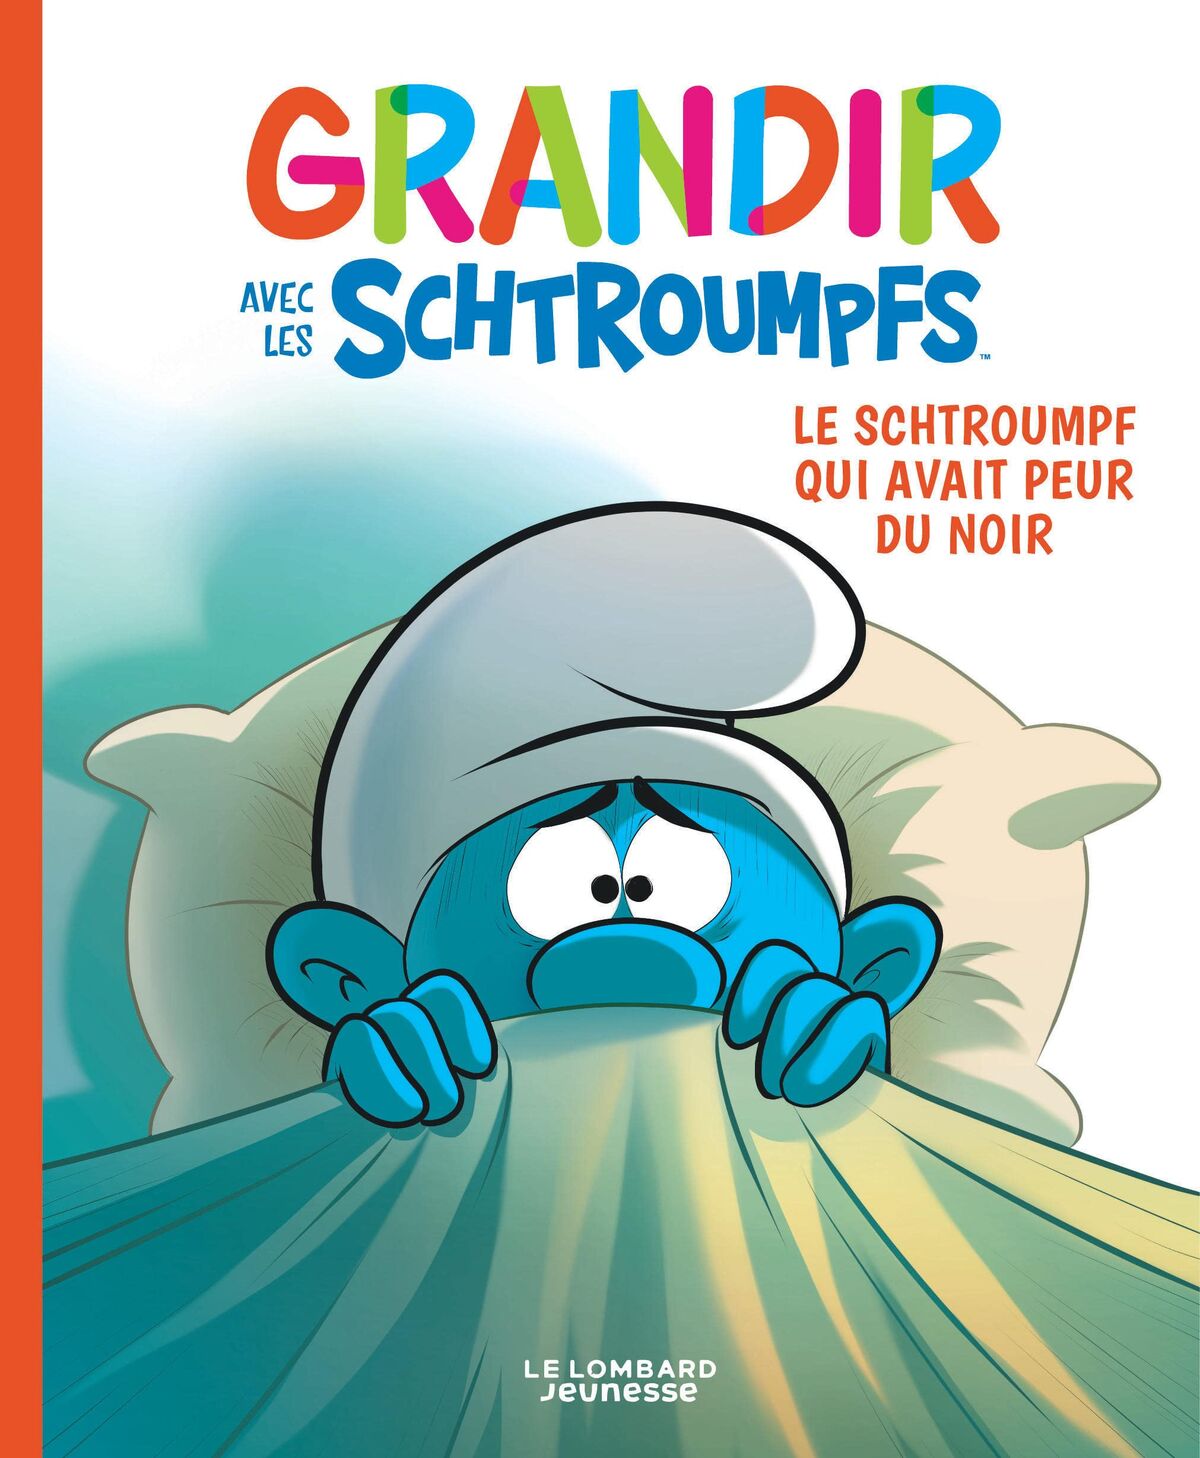 Smurf Tales Vol. 8, Book by Peyo, Official Publisher Page